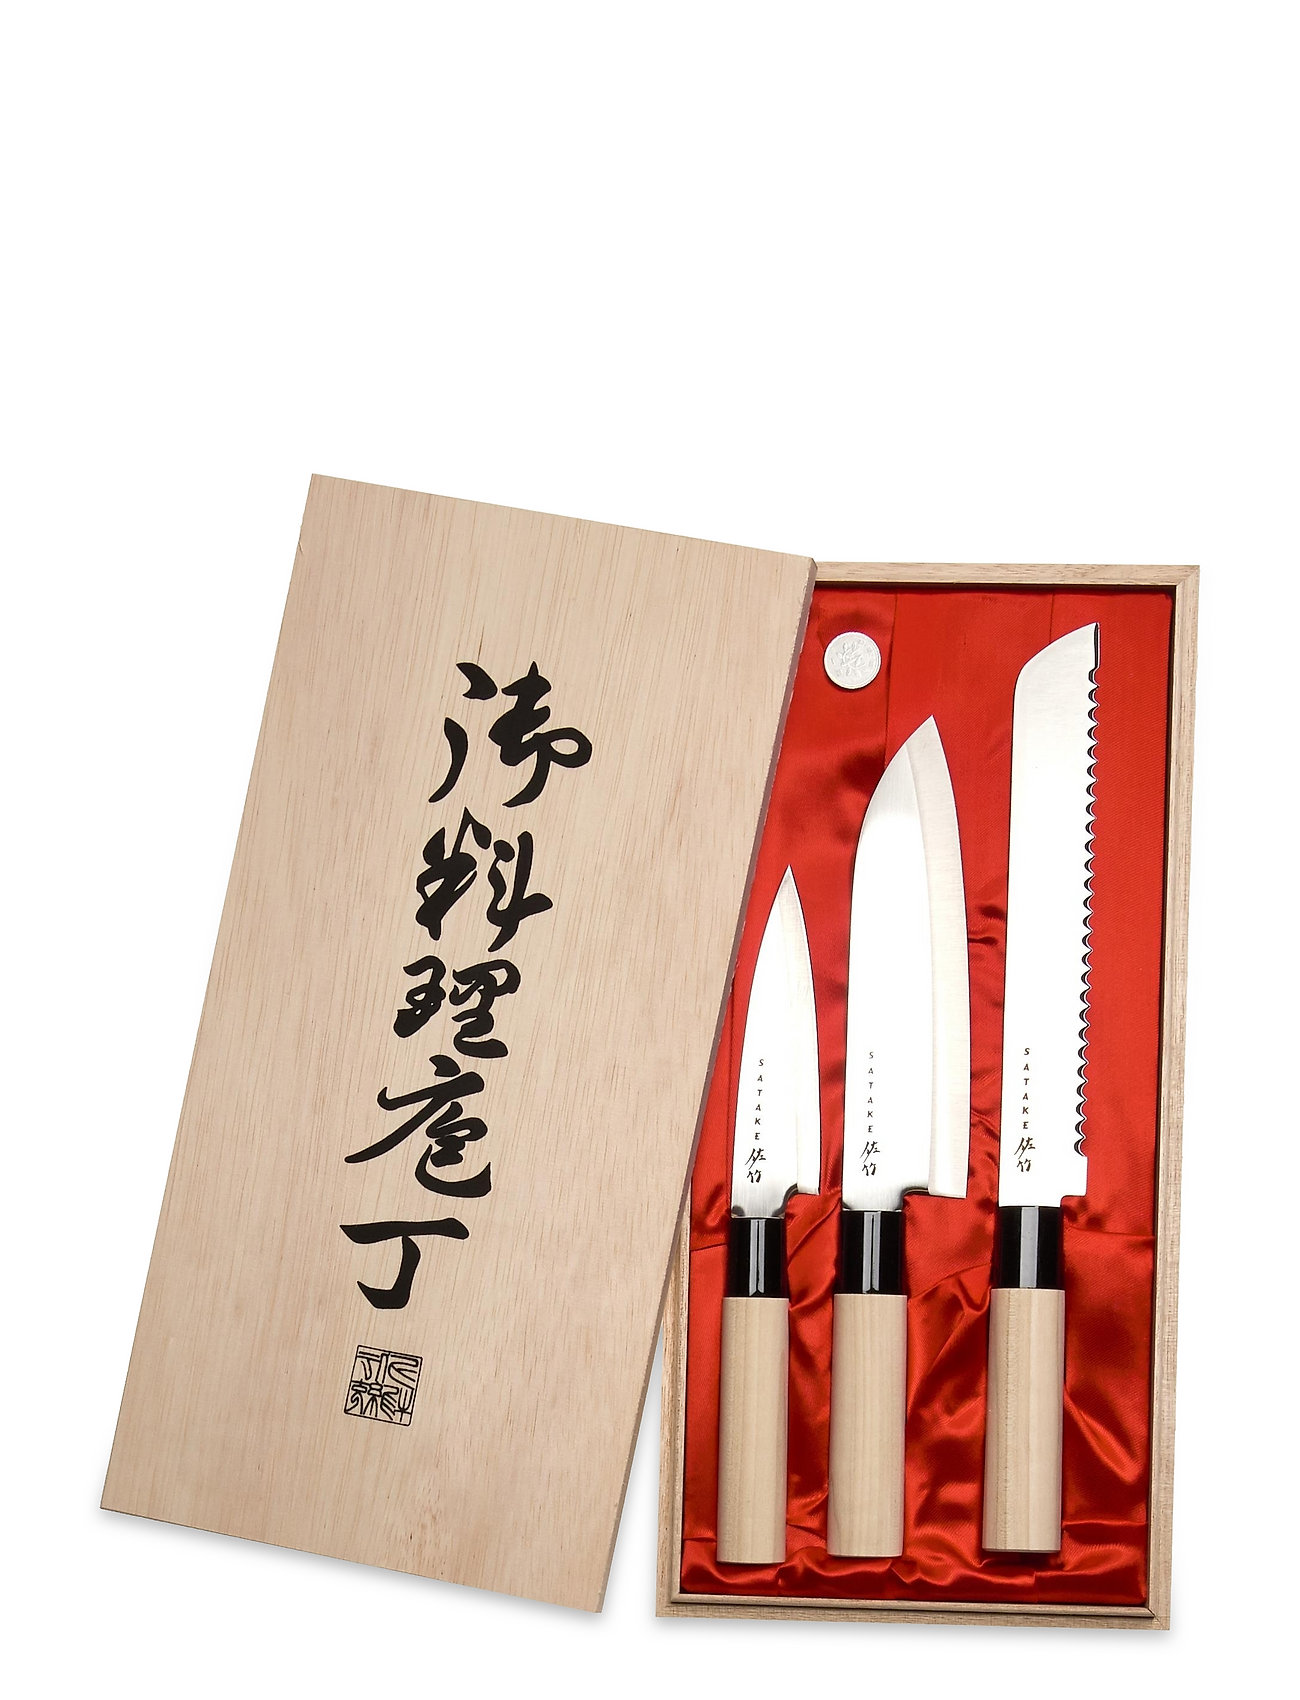 Satake Houcho Santoku, Petty And Bread Knife In Gift Box Home Kitchen Knives & Accessories Knife Sets Beige Satake